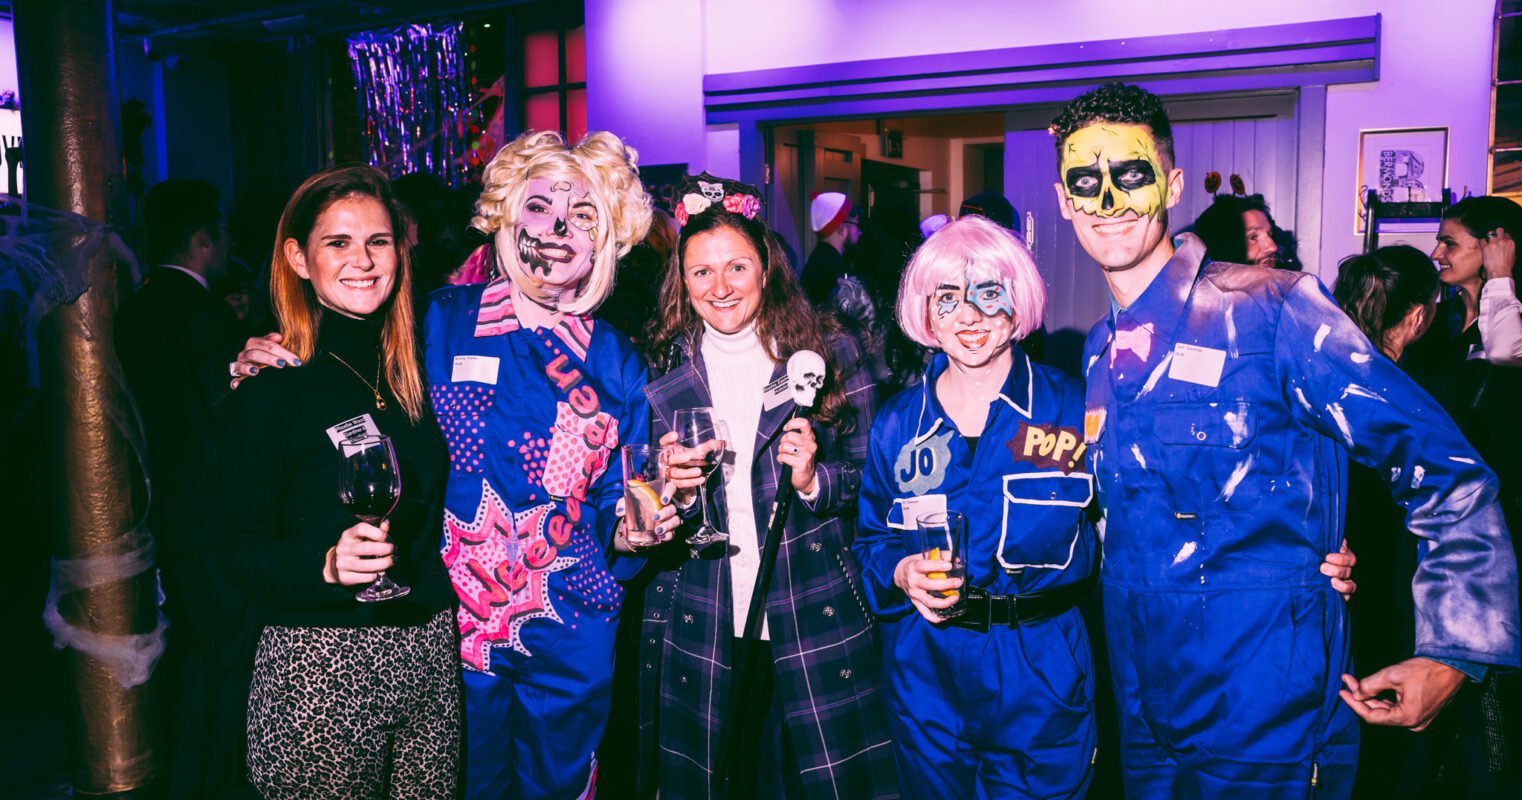 A festive gathering of party-goers in face paint and costumes, with drinks in hand.